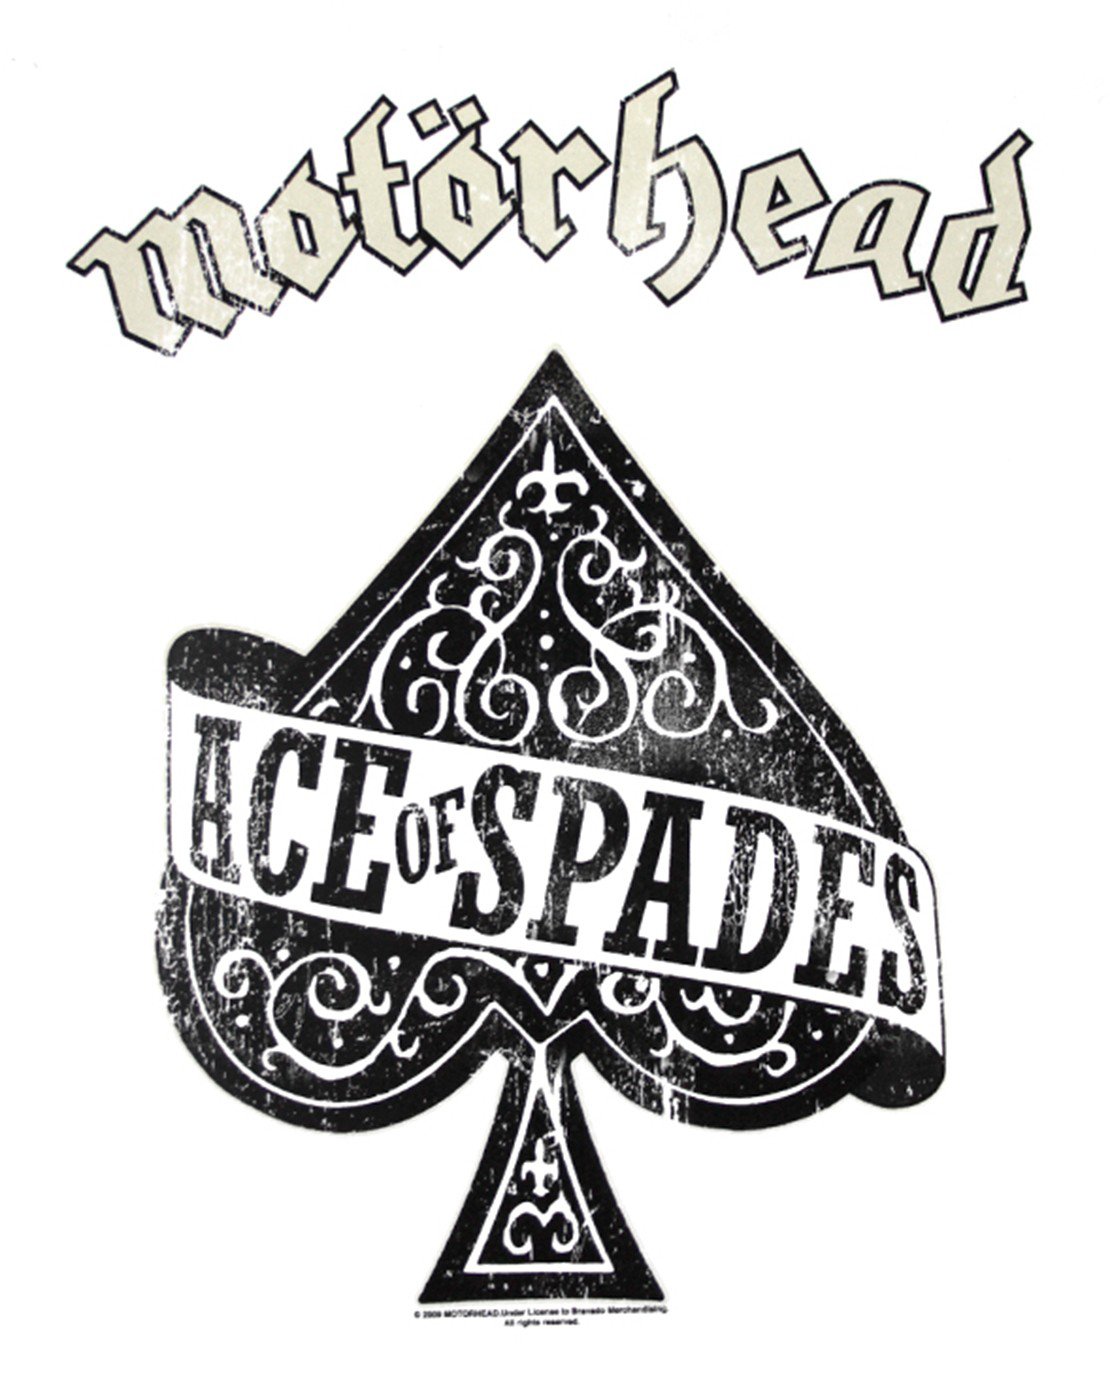 The ace of spades